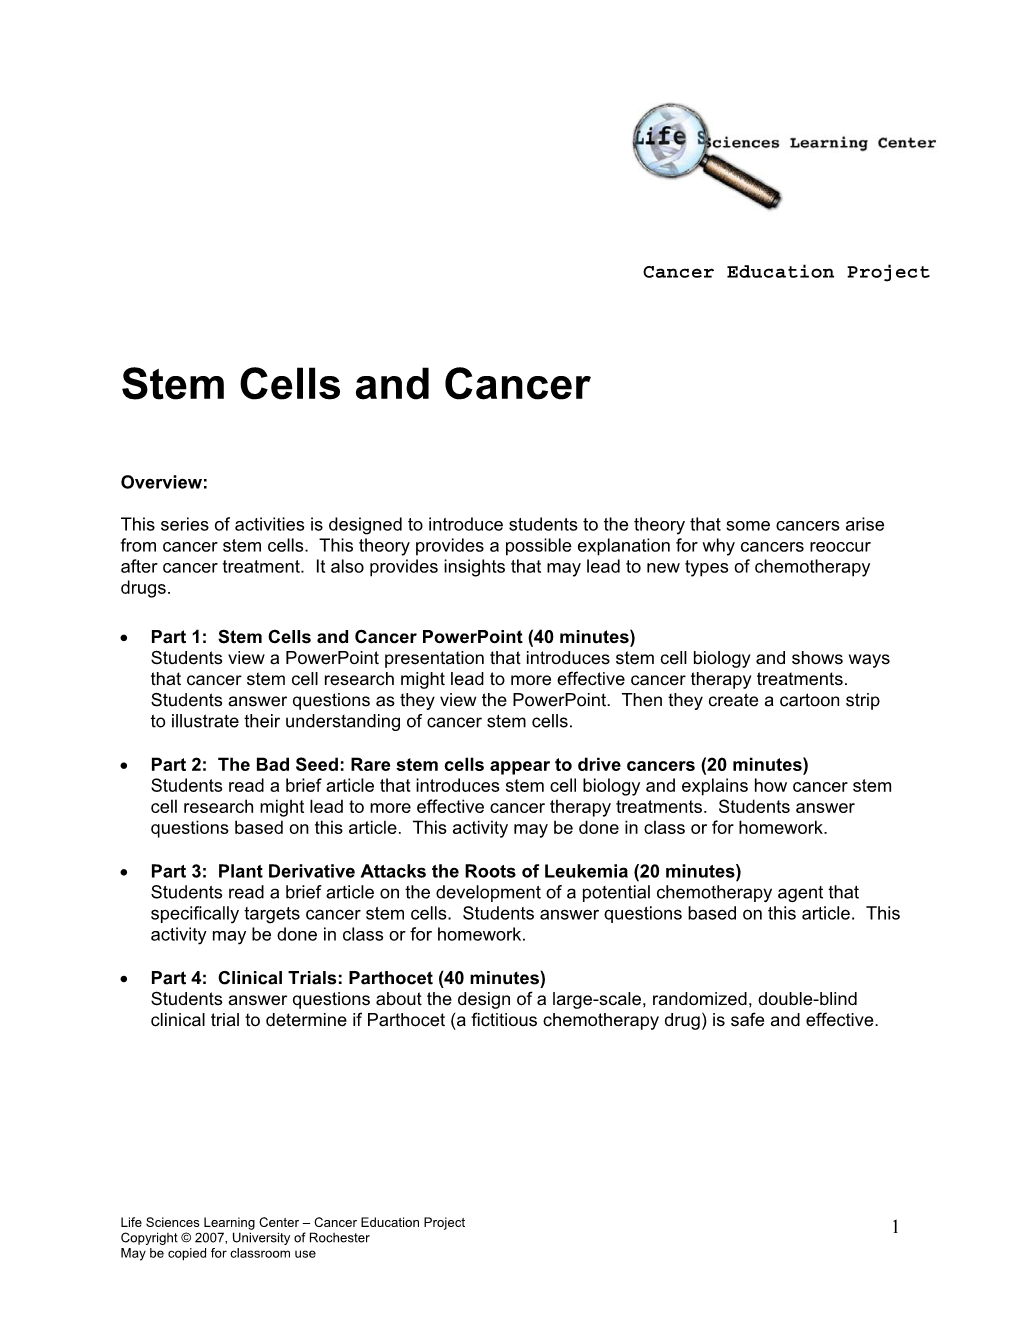 Stem Cells and Cancer